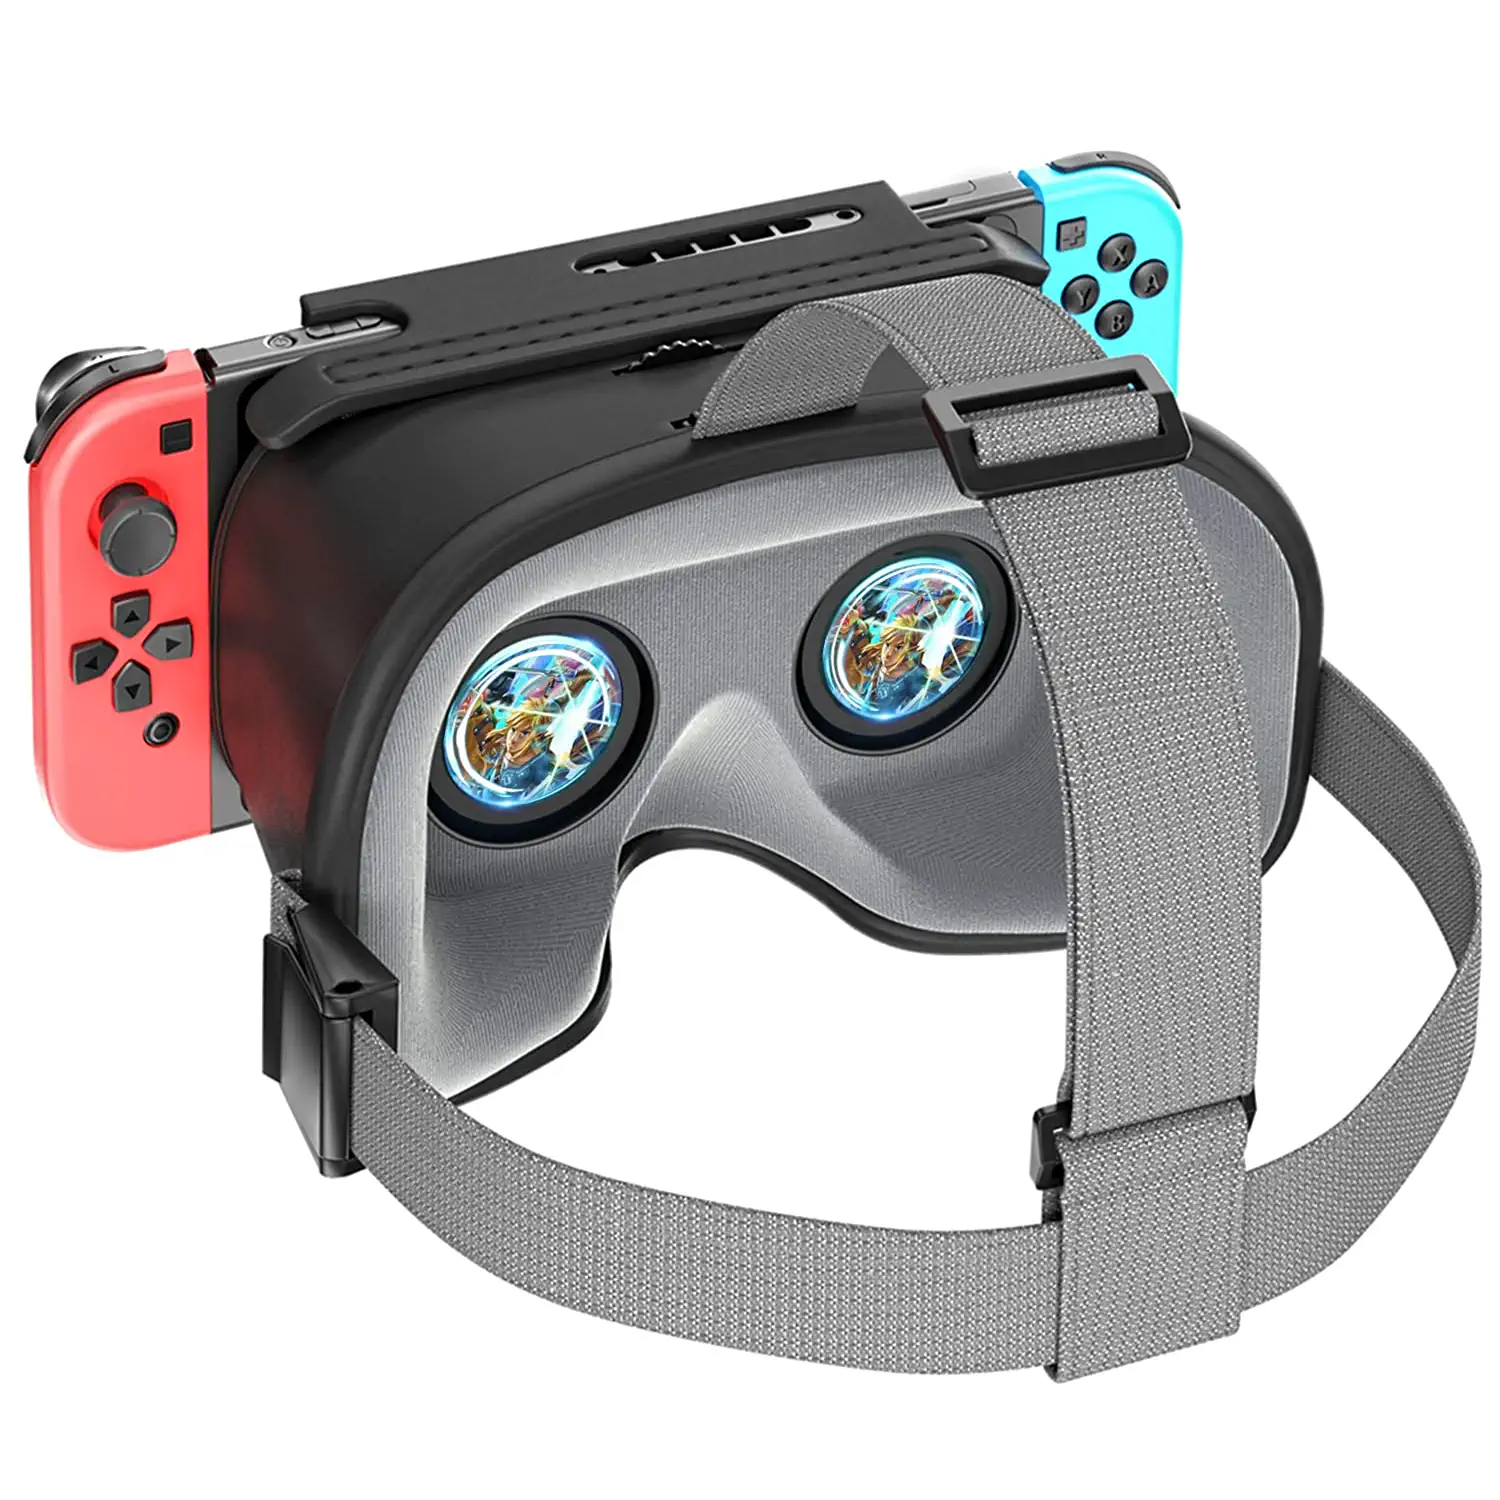 Switch Vr Headset Compatible With Nintendo Switch, Upgraded With Adjustable Hd L